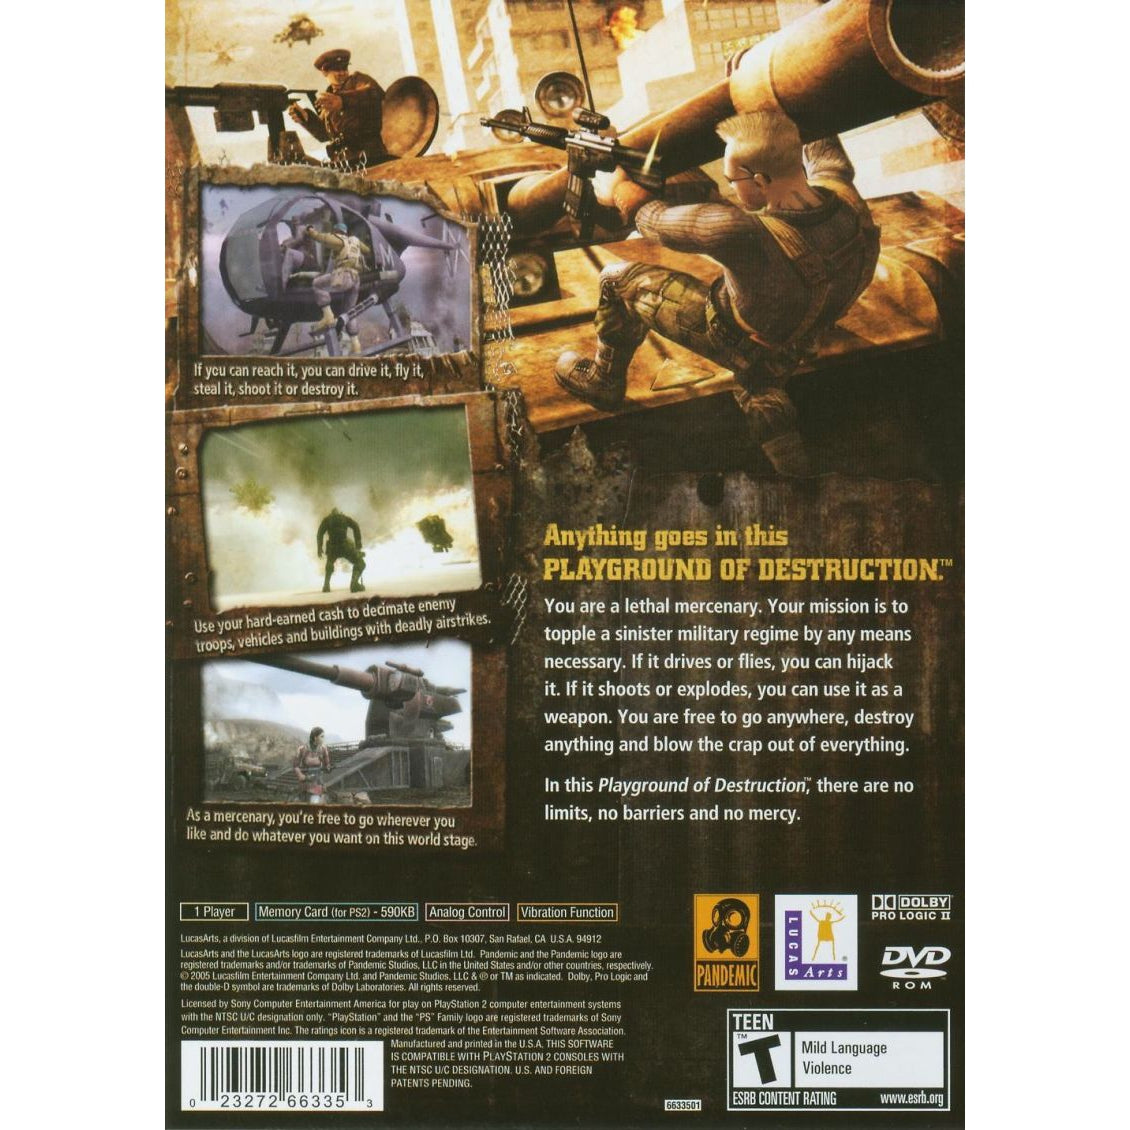 Mercenaries: Playground of Destruction - PlayStation 2 (PS2) Game Complete - YourGamingShop.com - Buy, Sell, Trade Video Games Online. 120 Day Warranty. Satisfaction Guaranteed.